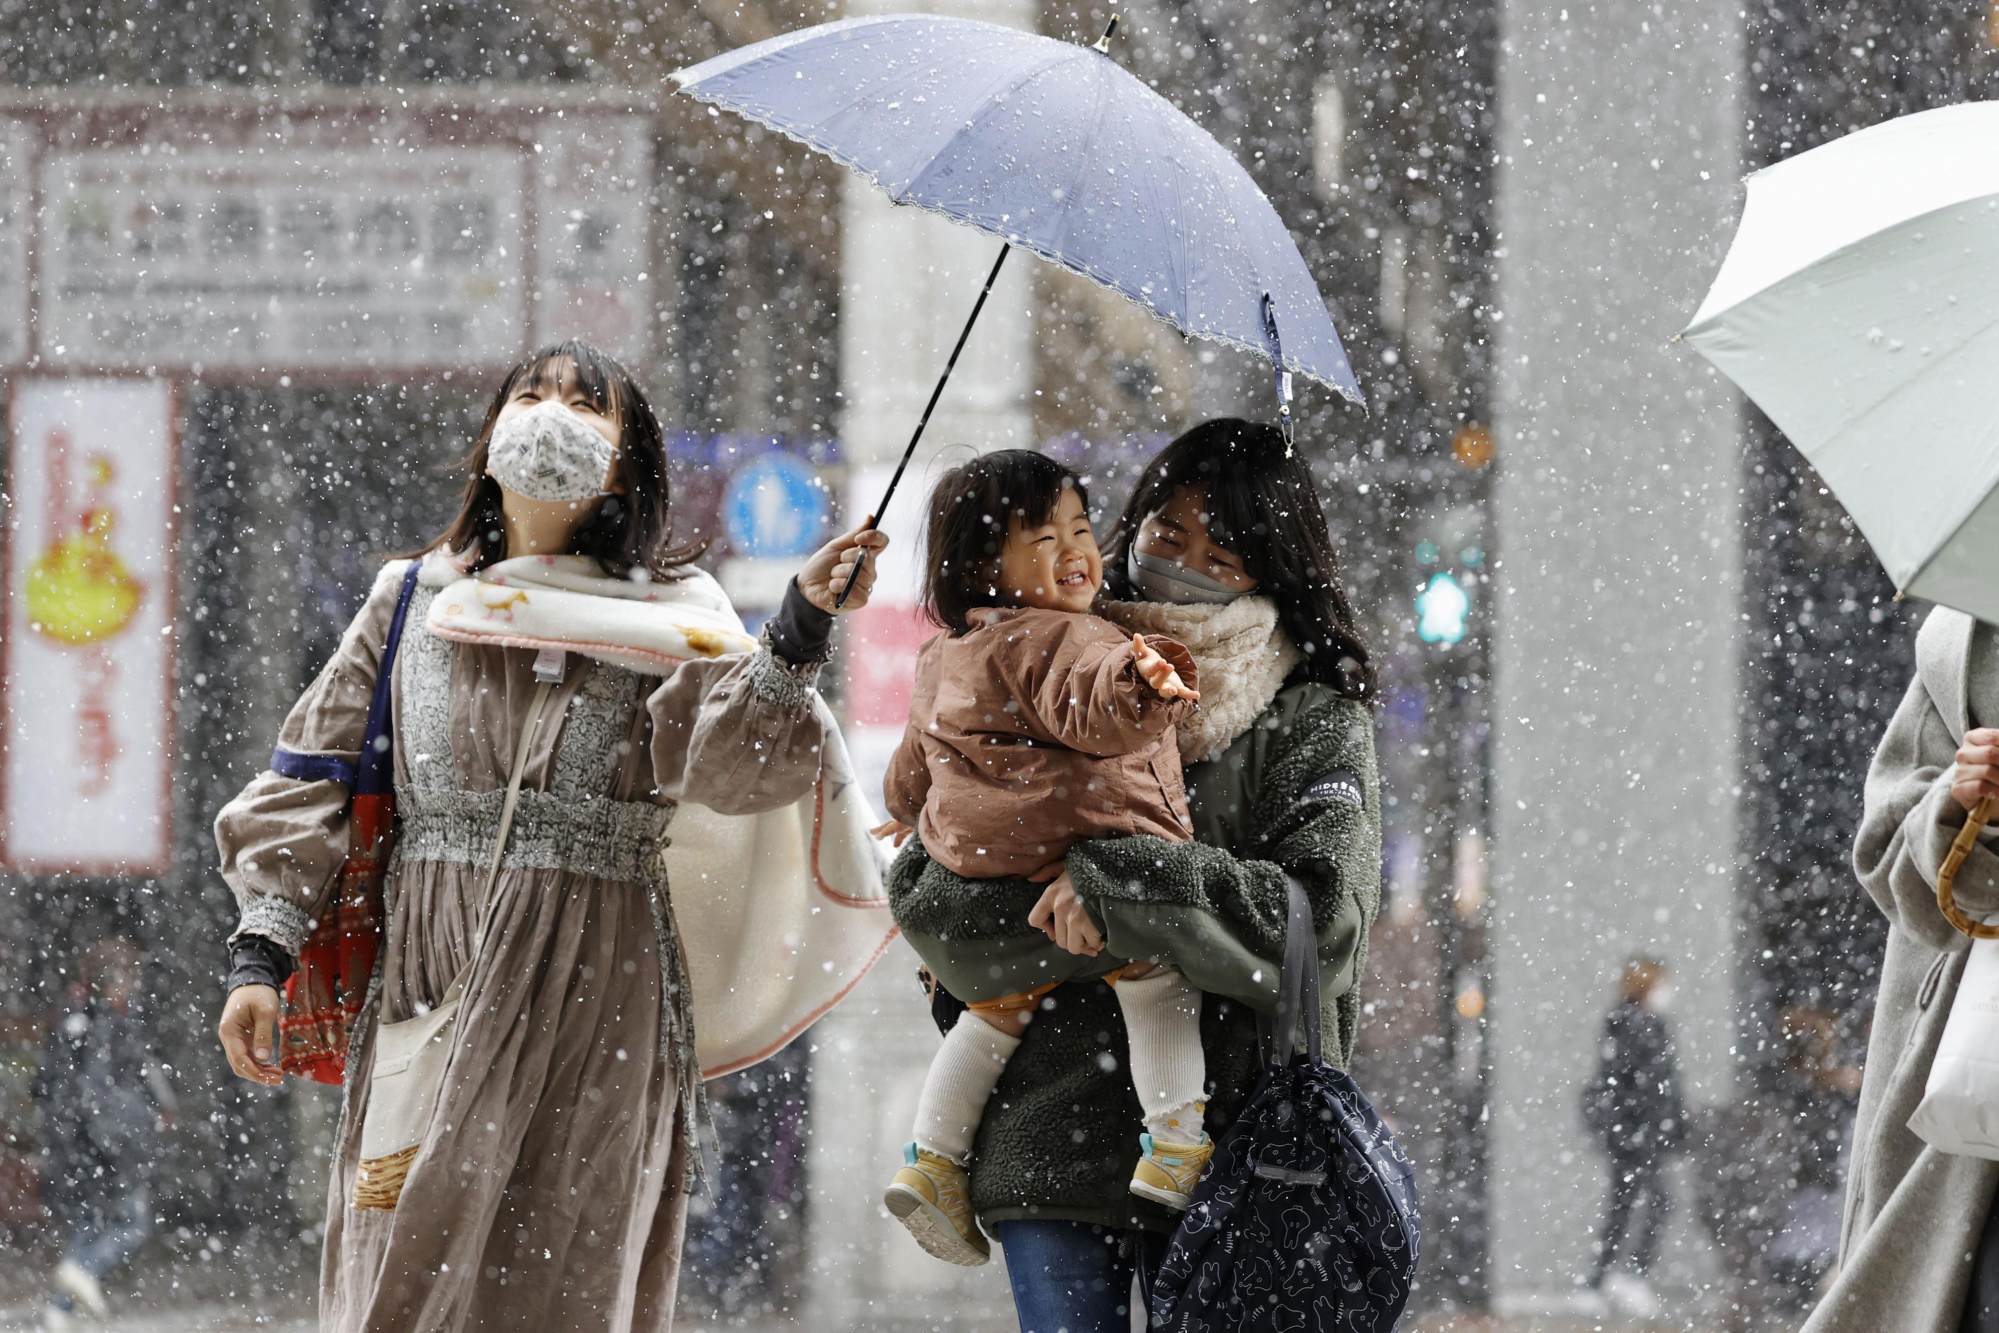 ‘Once-in-a-decade’ blizzard blows up holiday plans for thousands of Hong Kong tourists in Japan